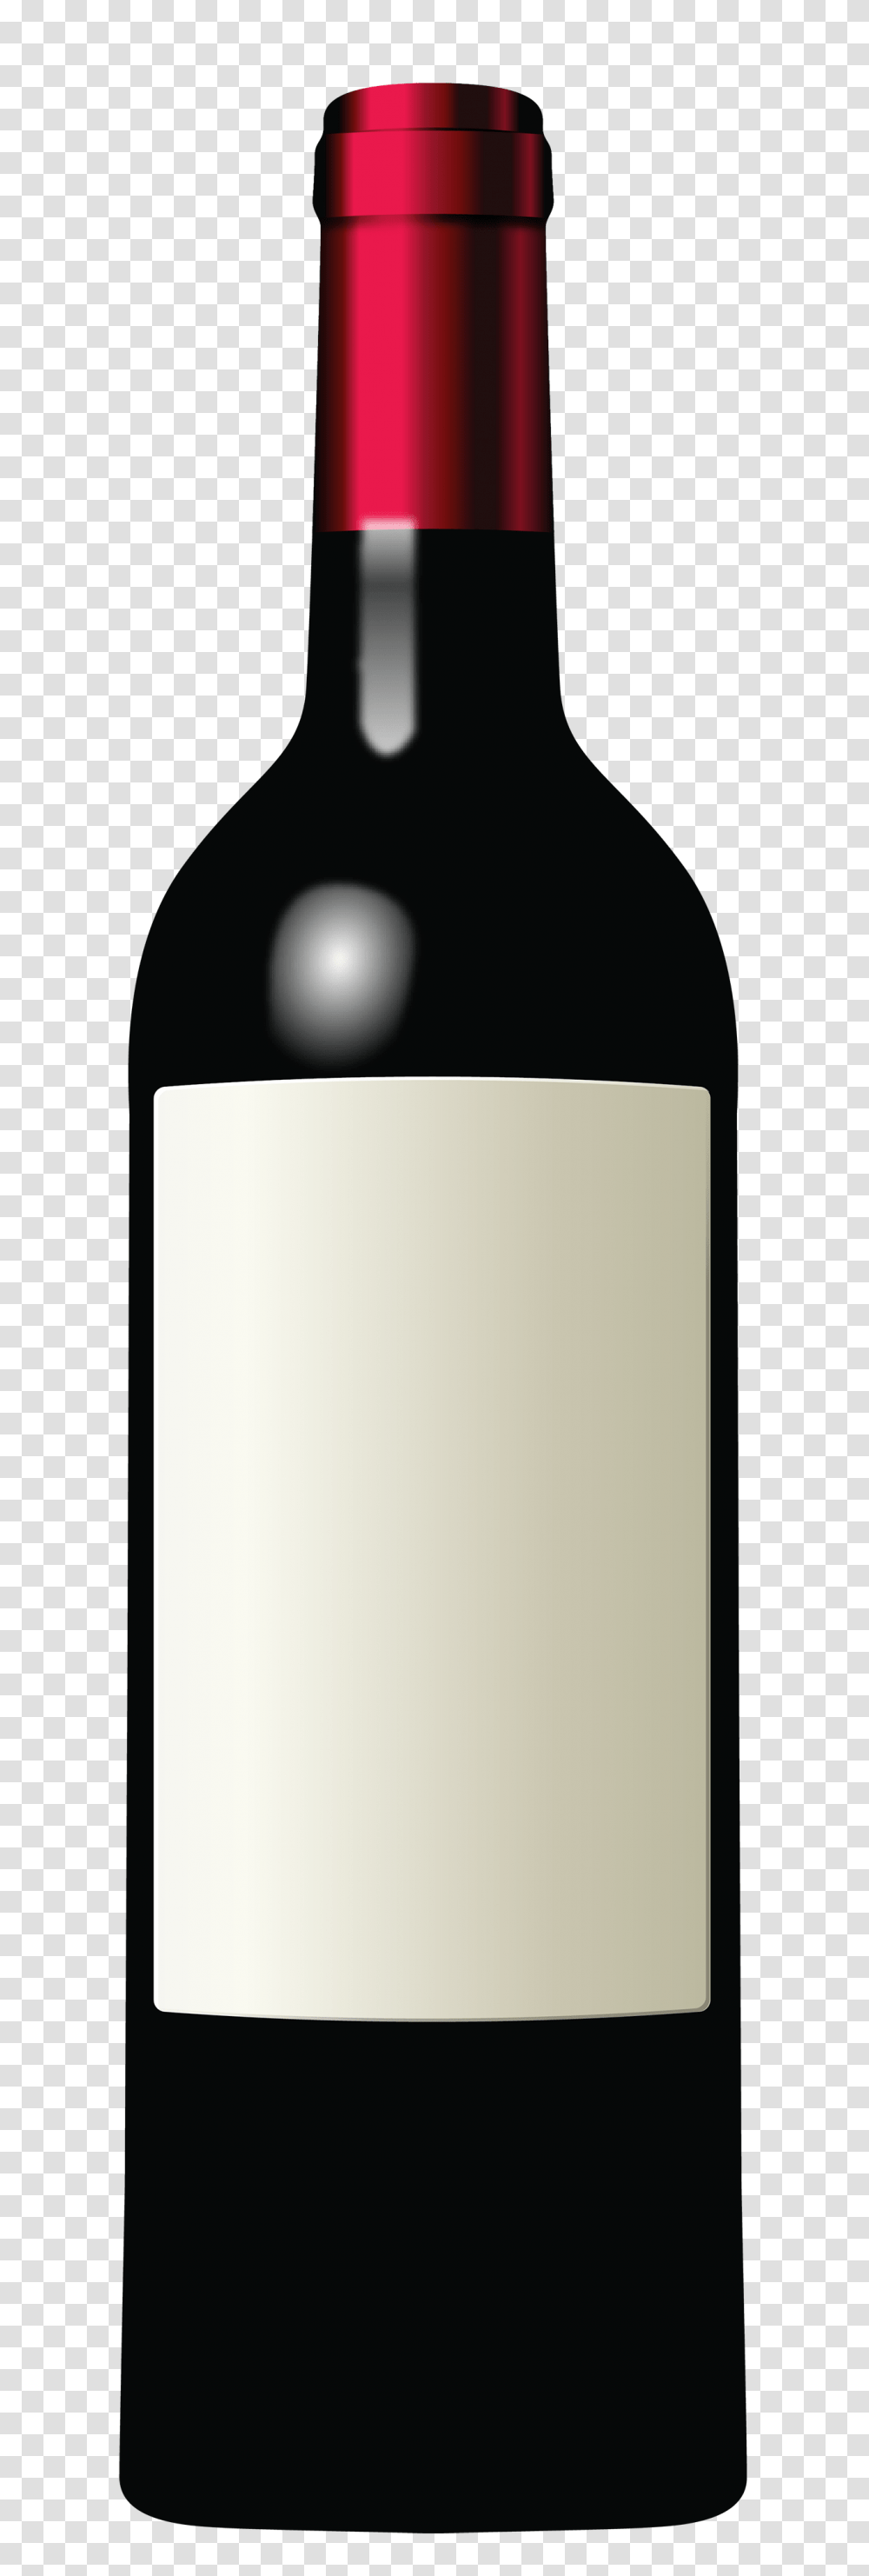 Whiskey Bottle And Glass Clip Art, Wine, Alcohol, Beverage, Drink Transparent Png